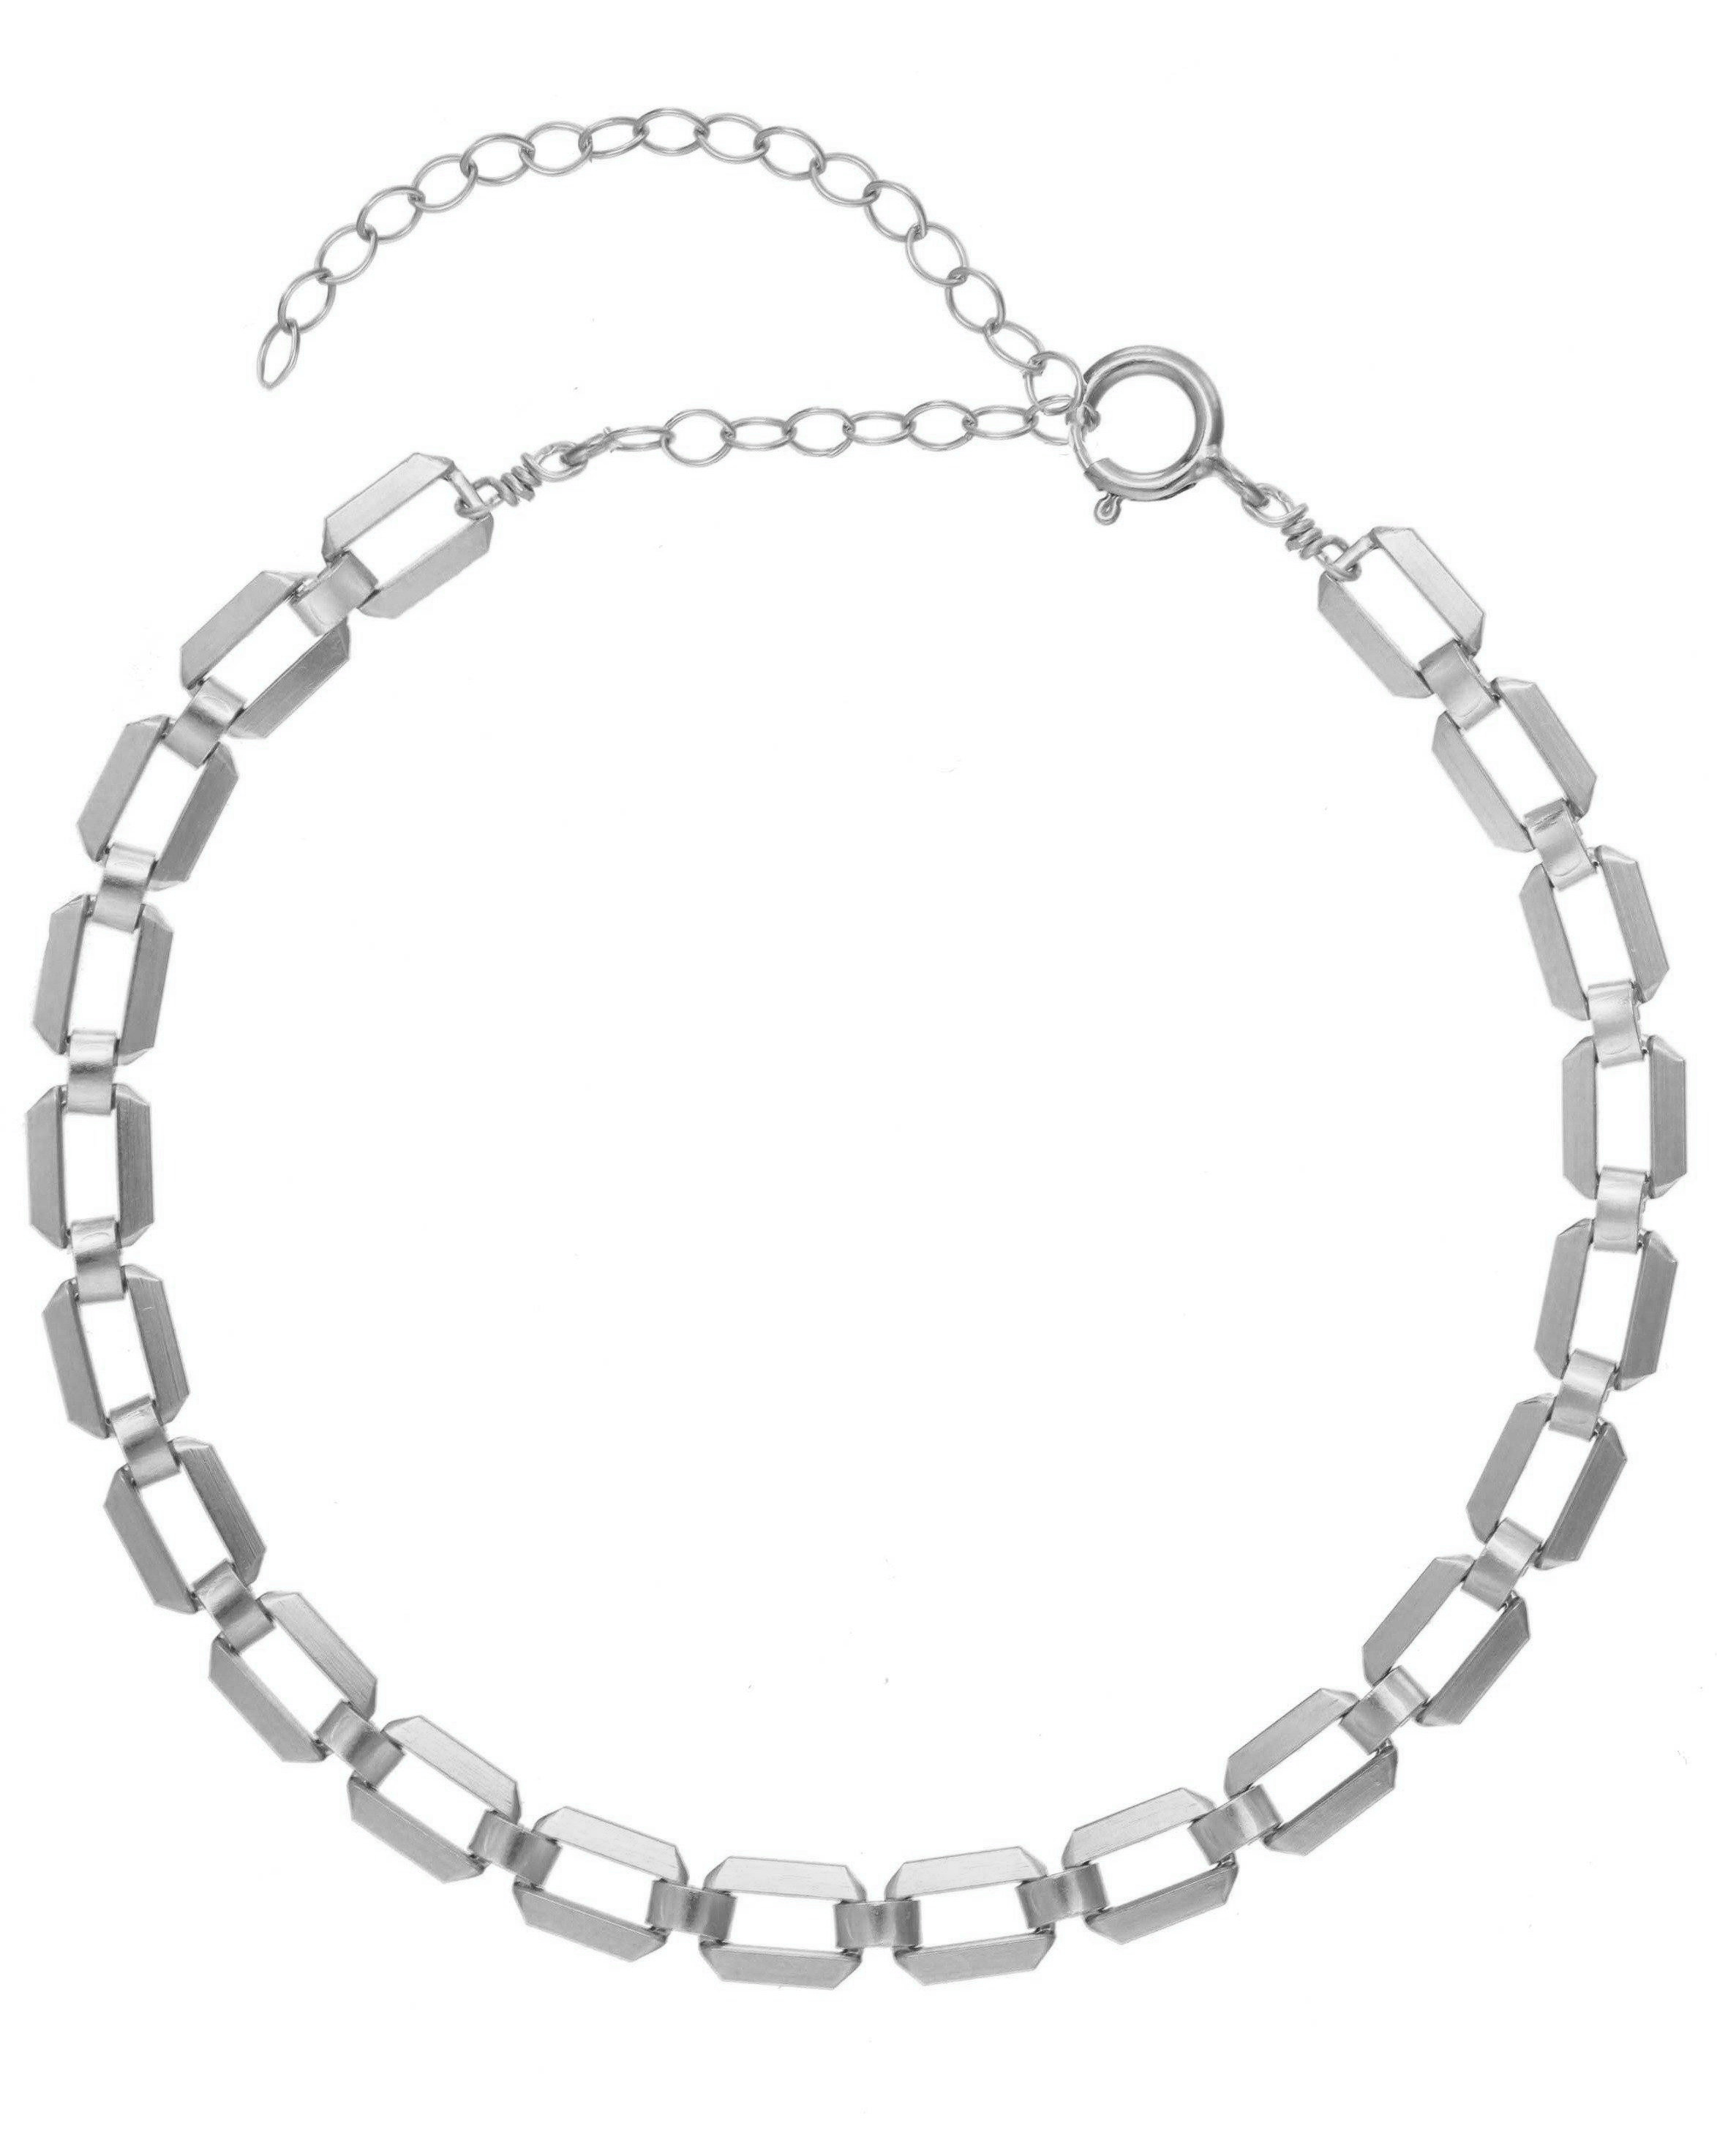 Carti Bracelet by KOZAKH. A 6 to 7 inch adjustable length chain bracelet, crafted in Sterling Silver.